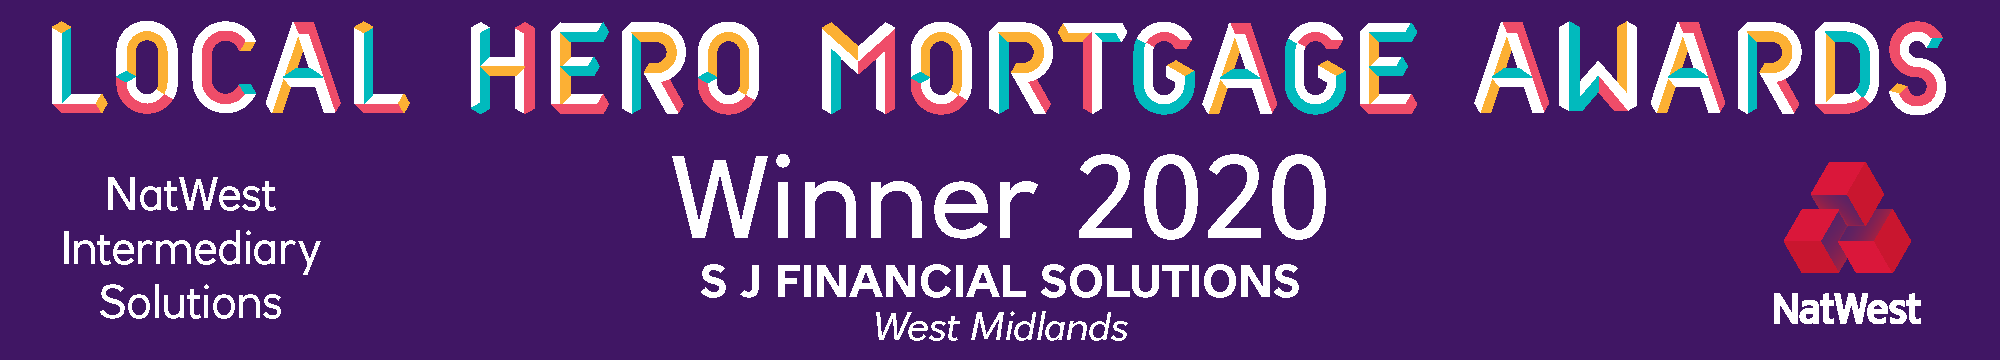 SJ Financial Solutions Wins Local Hero Mortgage Awards for West Midlands